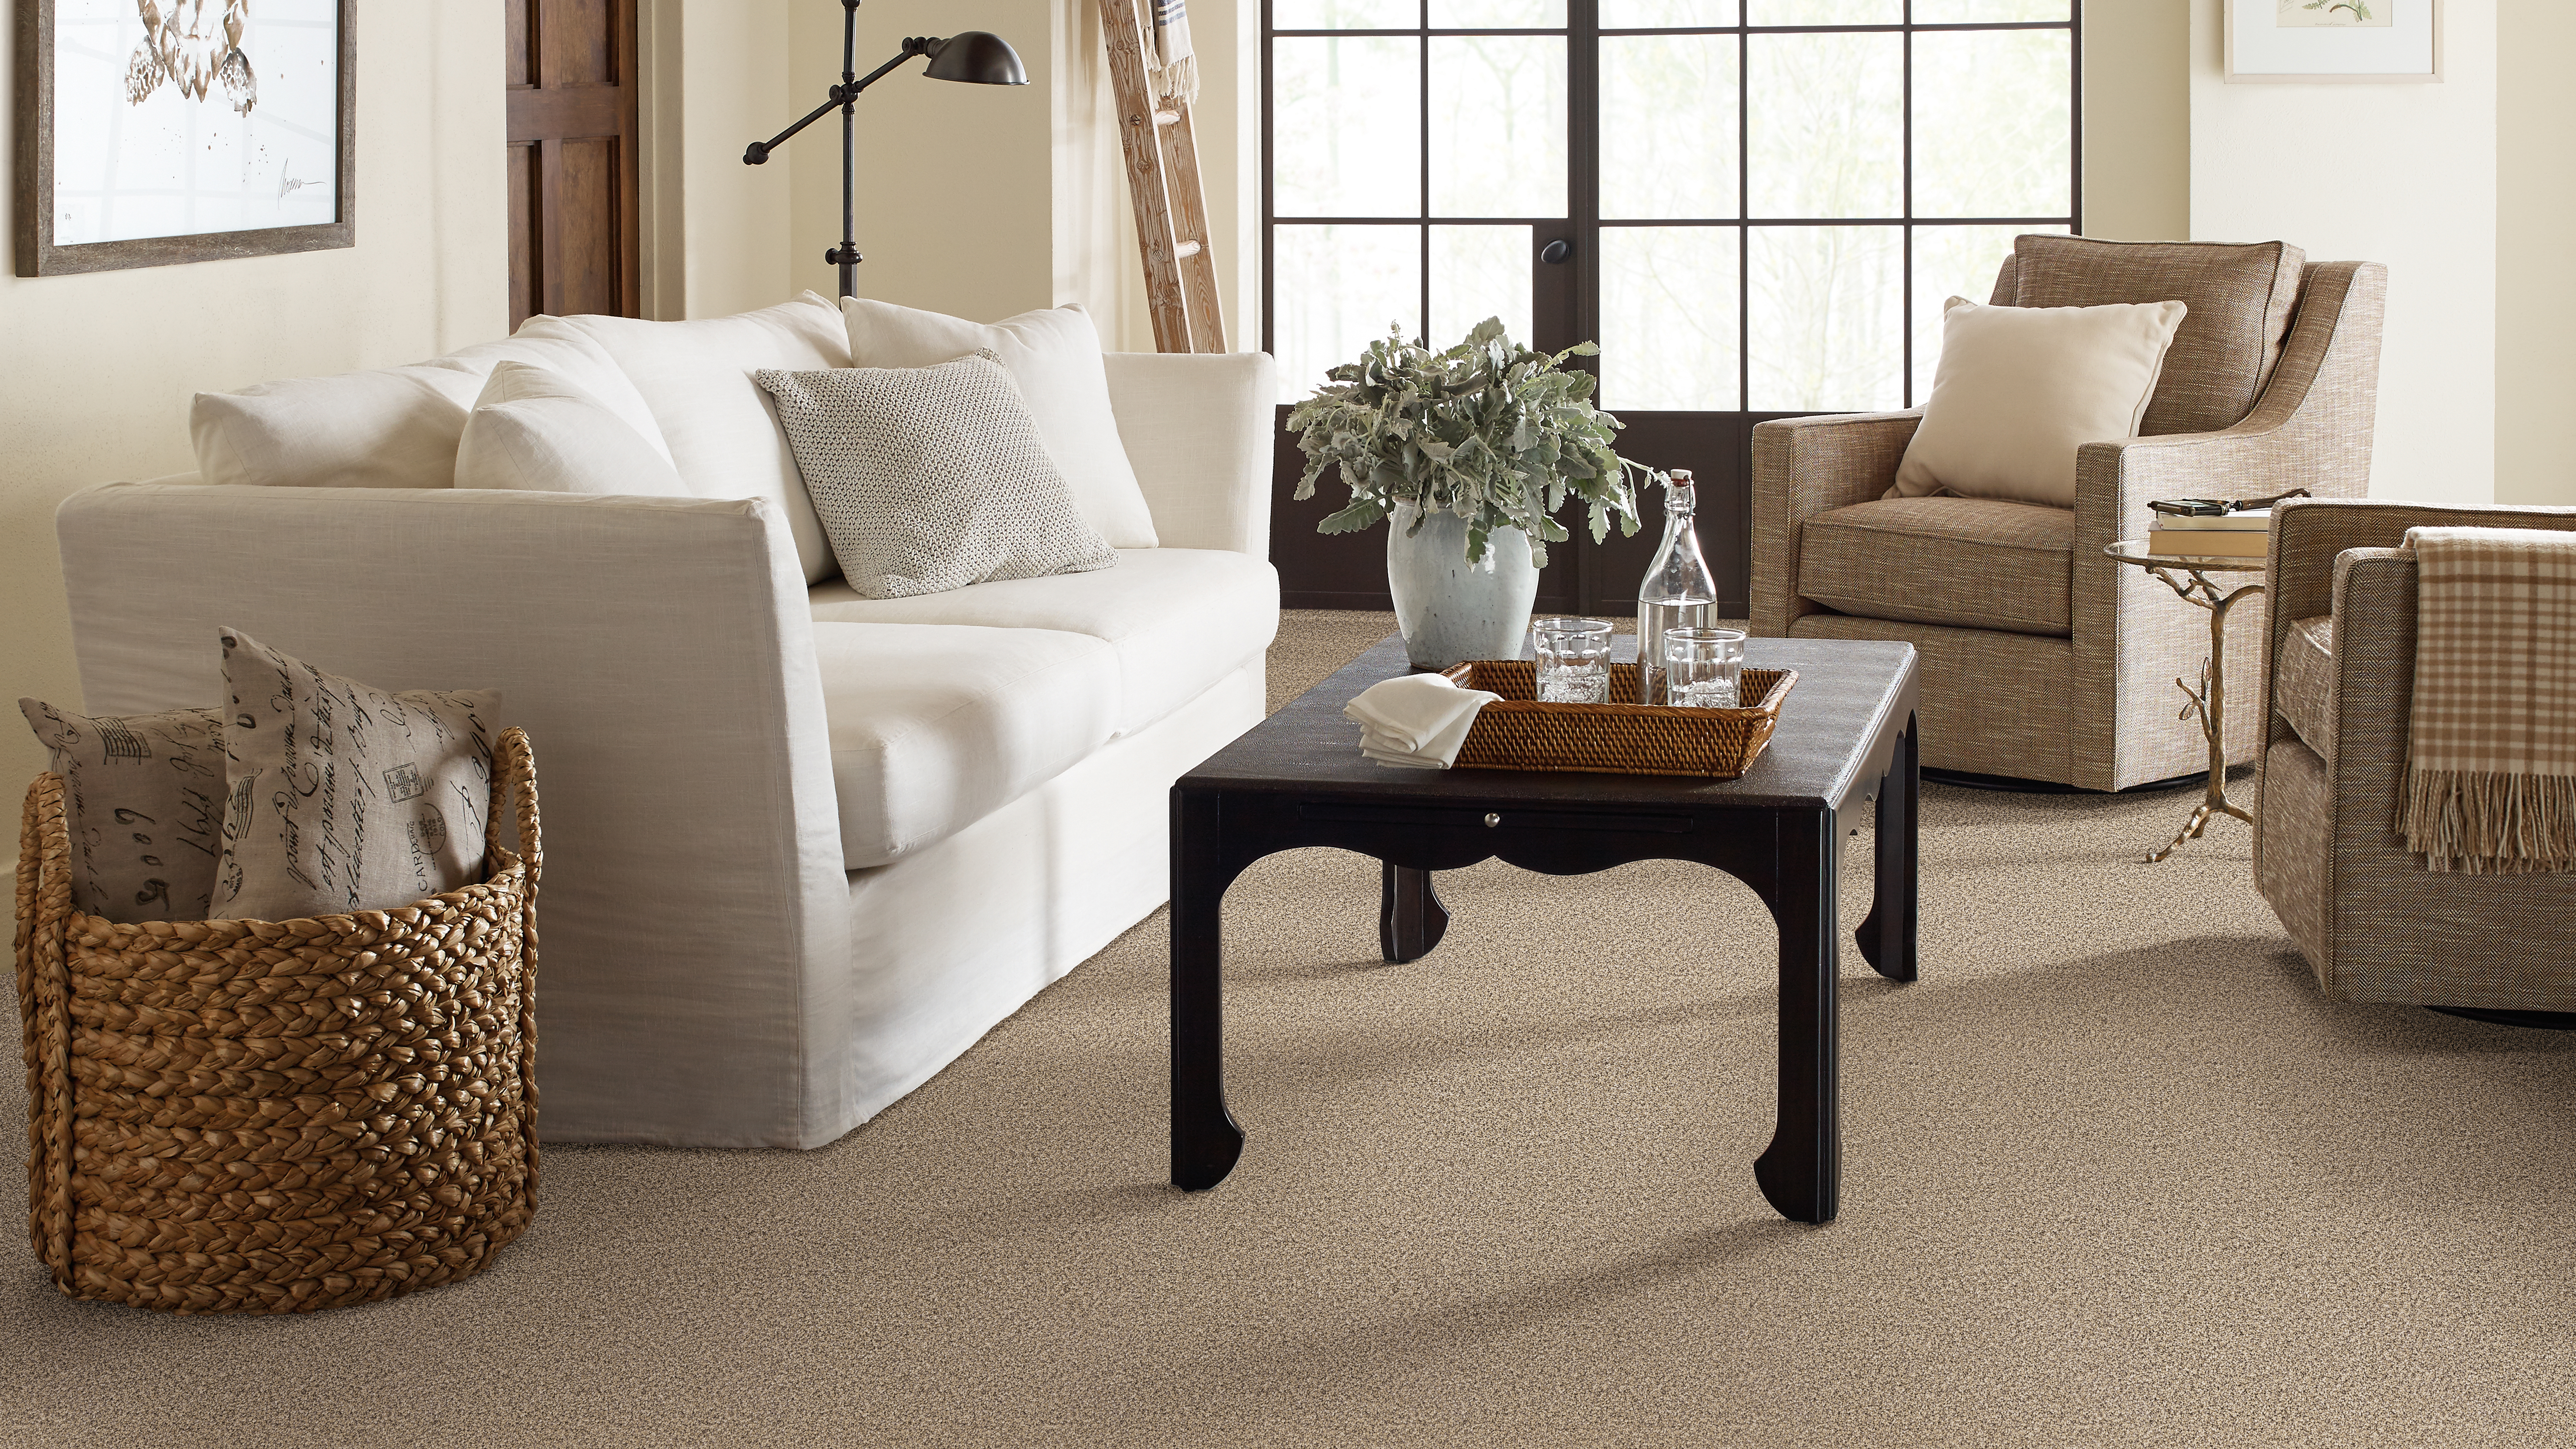 Living room carpet from Top Notch Flooring America in Bel Air, MD